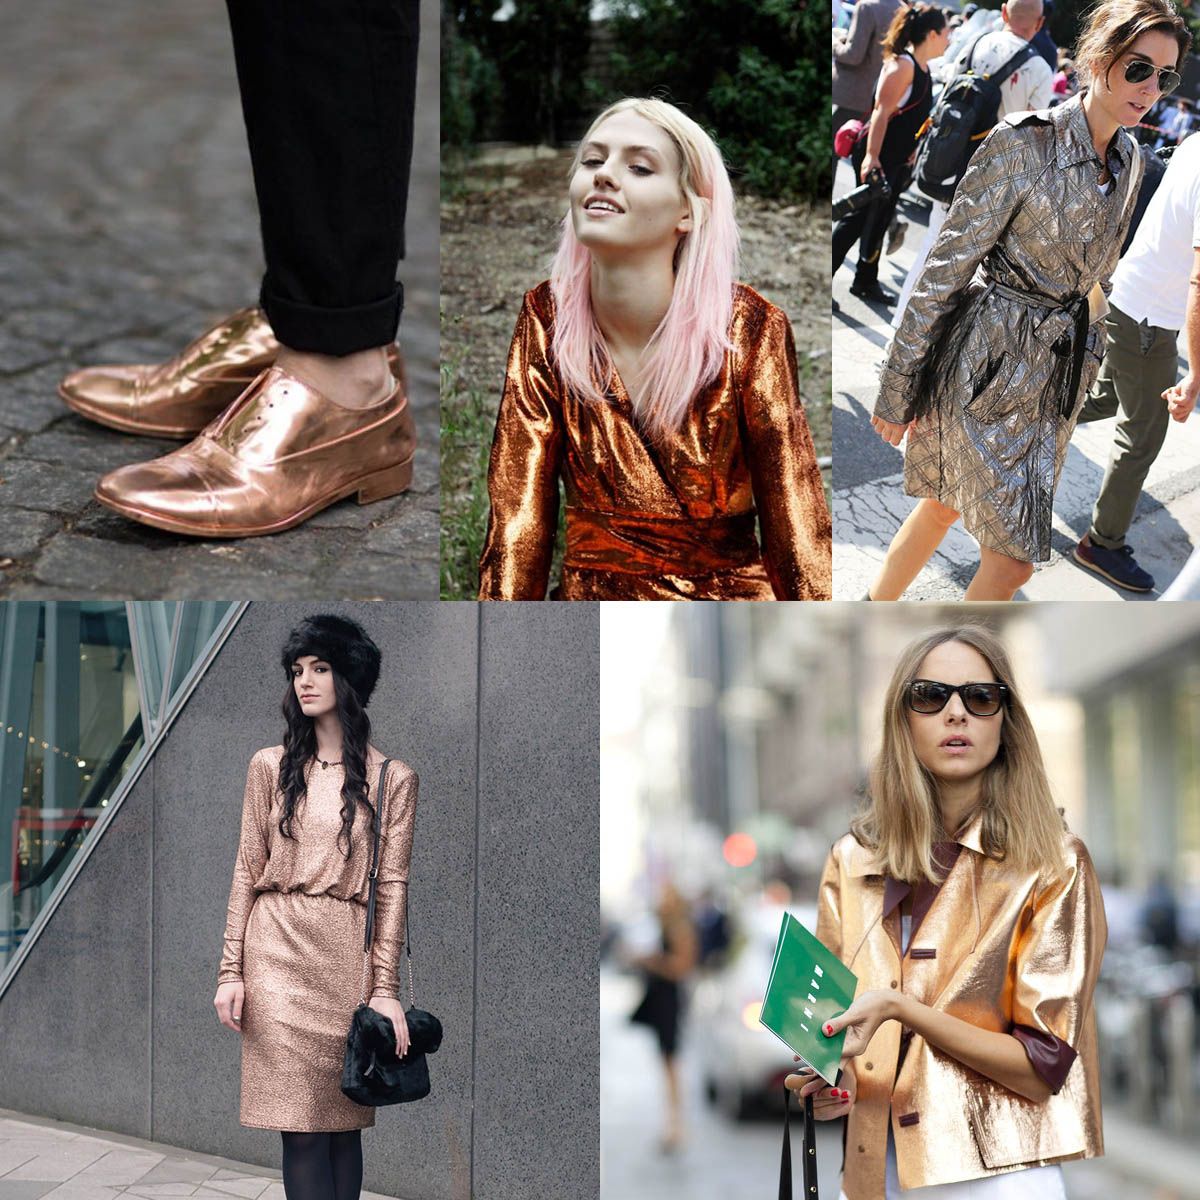 Shine on, Bela!  This Metallic Trend Is Ready To Steal The Attention Of Fashionistas!